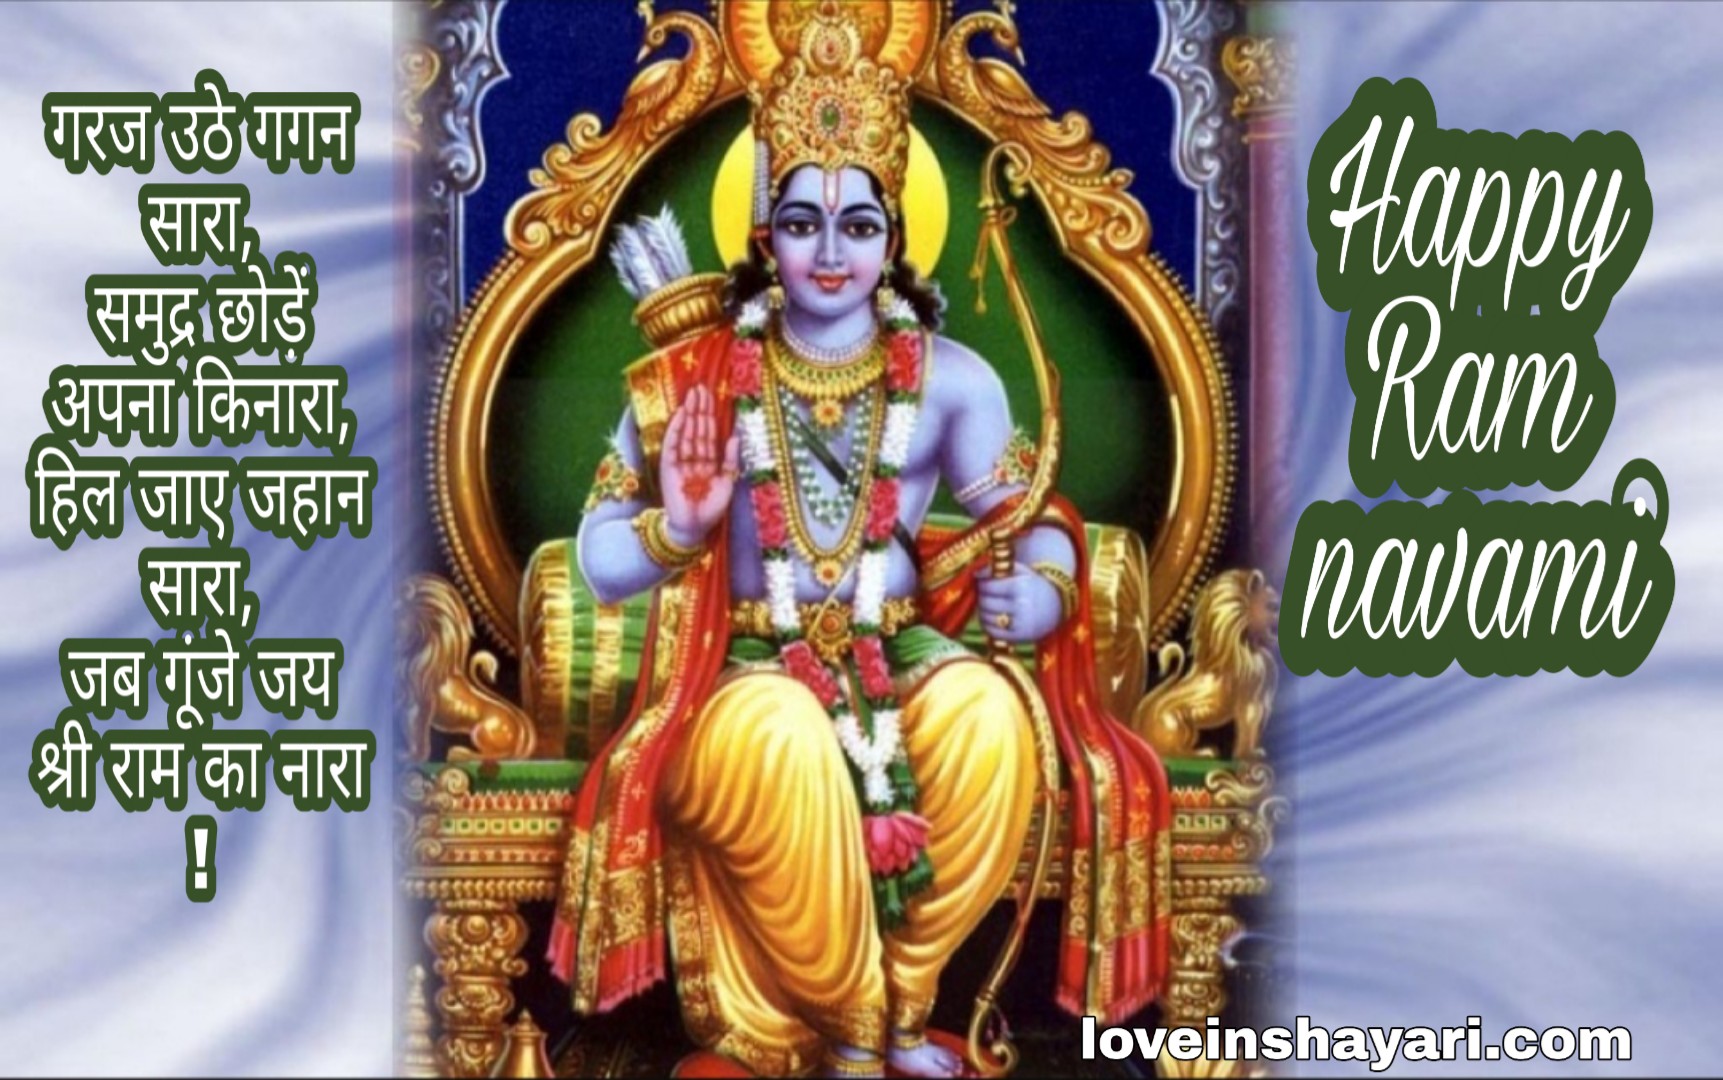 Lord Ram images